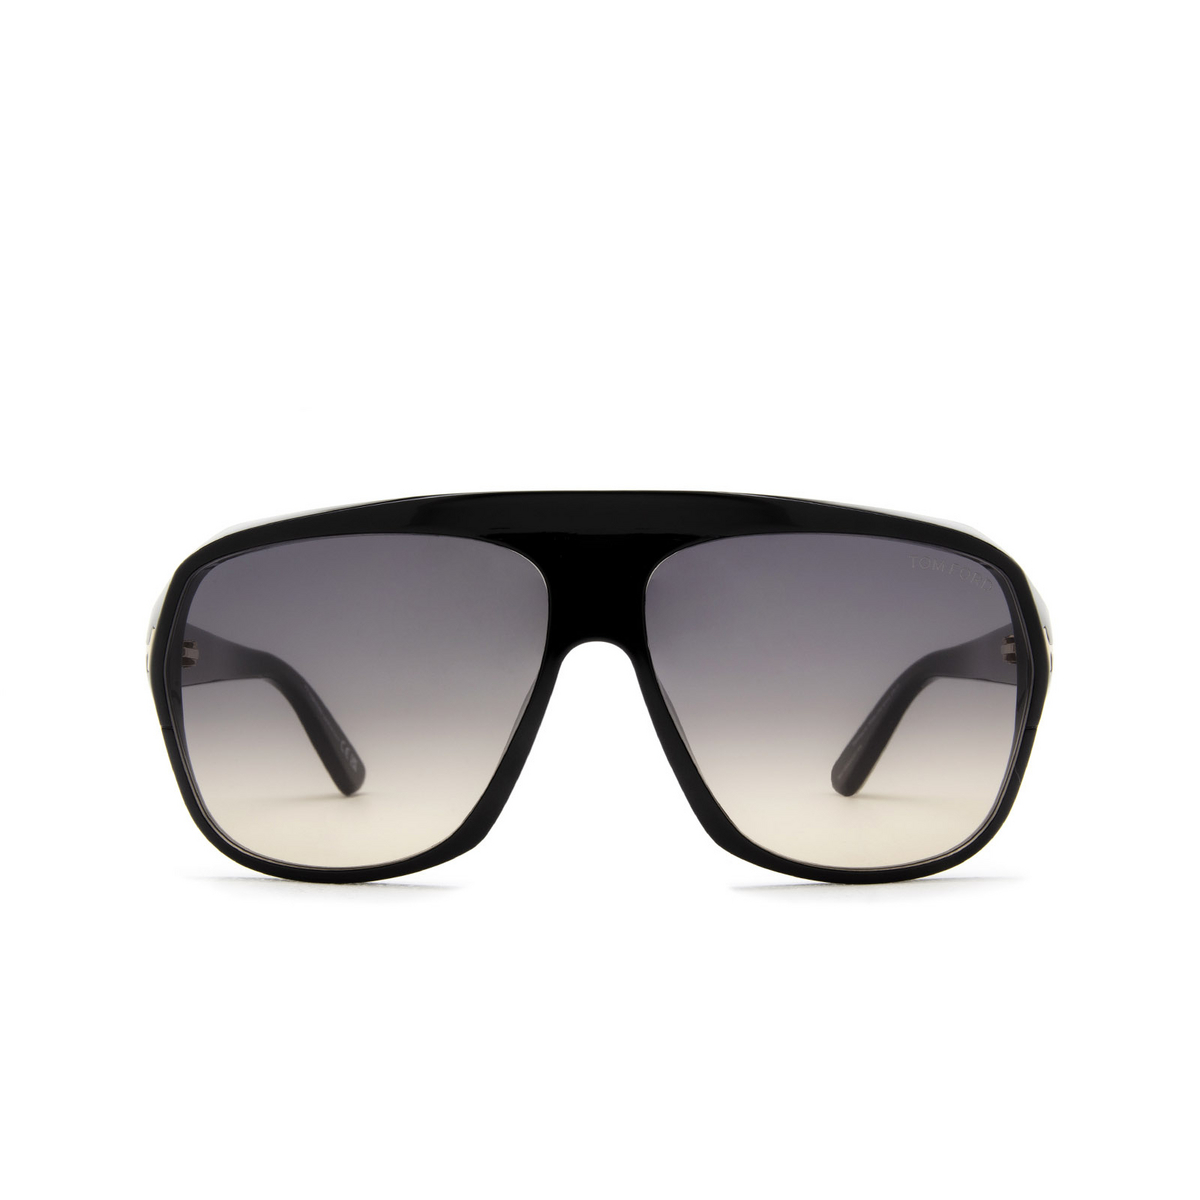 Tom Ford® Square Sunglasses: Hawkings-02 FT0908 color Black 01B - front view.